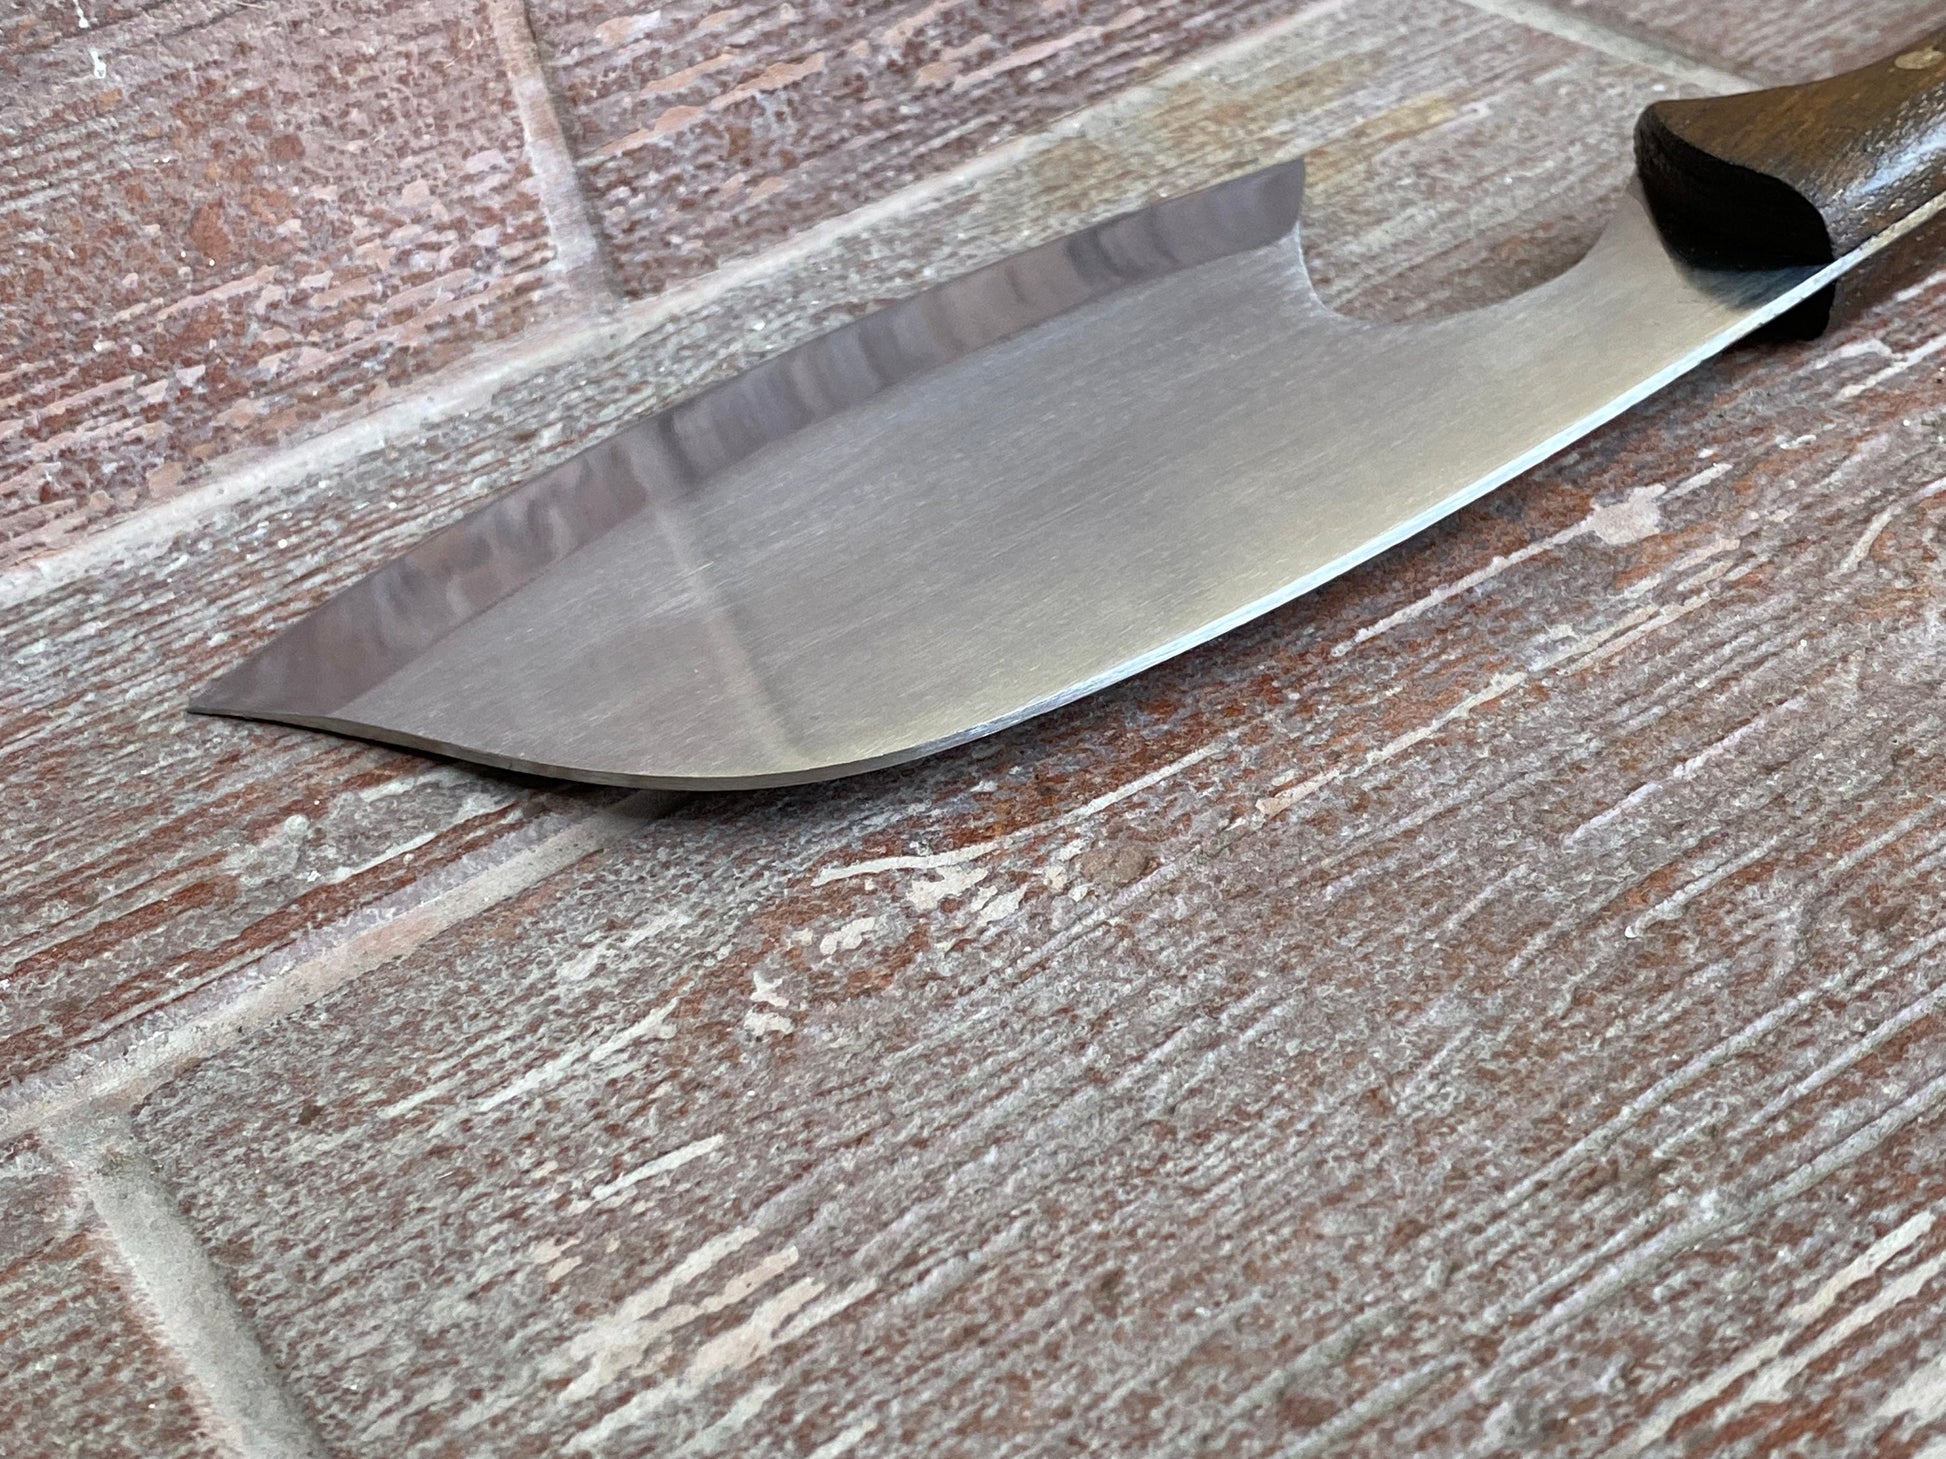 Stainless steel axe, cleaver knife, meat cleaver, meat chopper, butchers knife, steel gift, 11th anniversary, birthday, steel anniversary